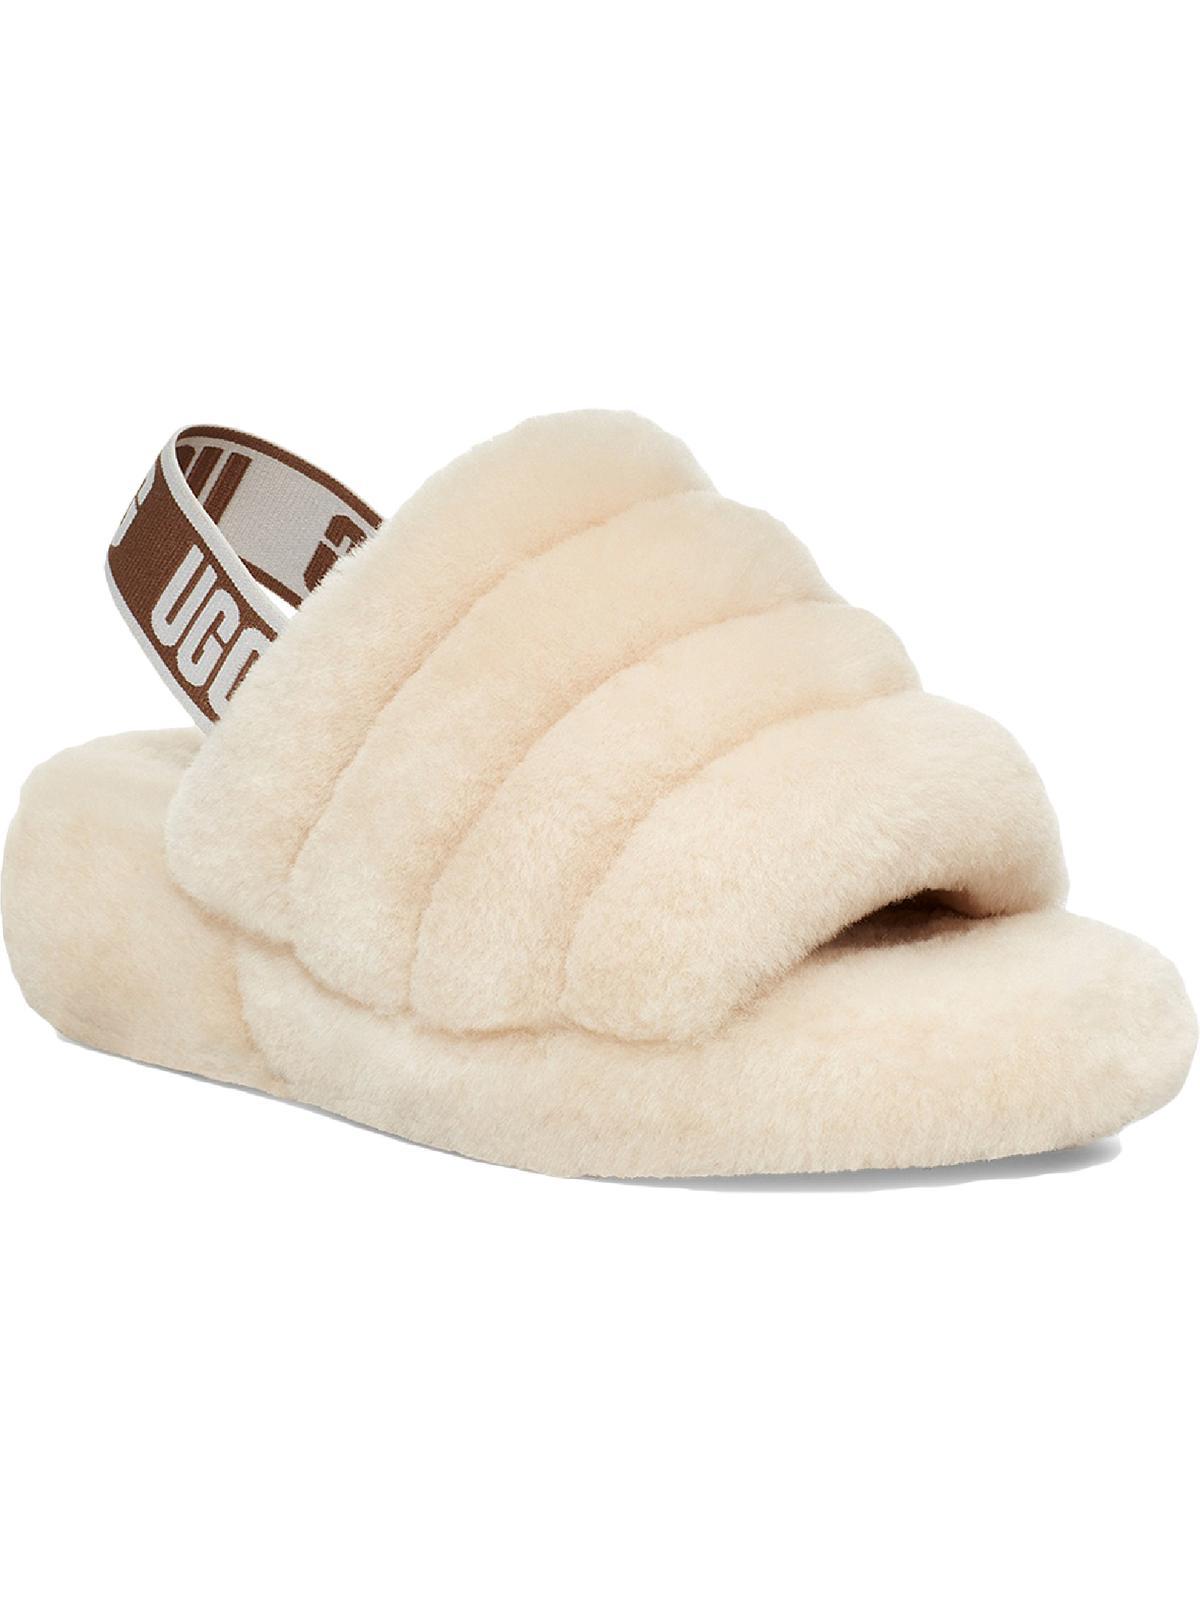 UGG Fluff Yeah Shearling Slingback Slide Slippers in Natural | Lyst